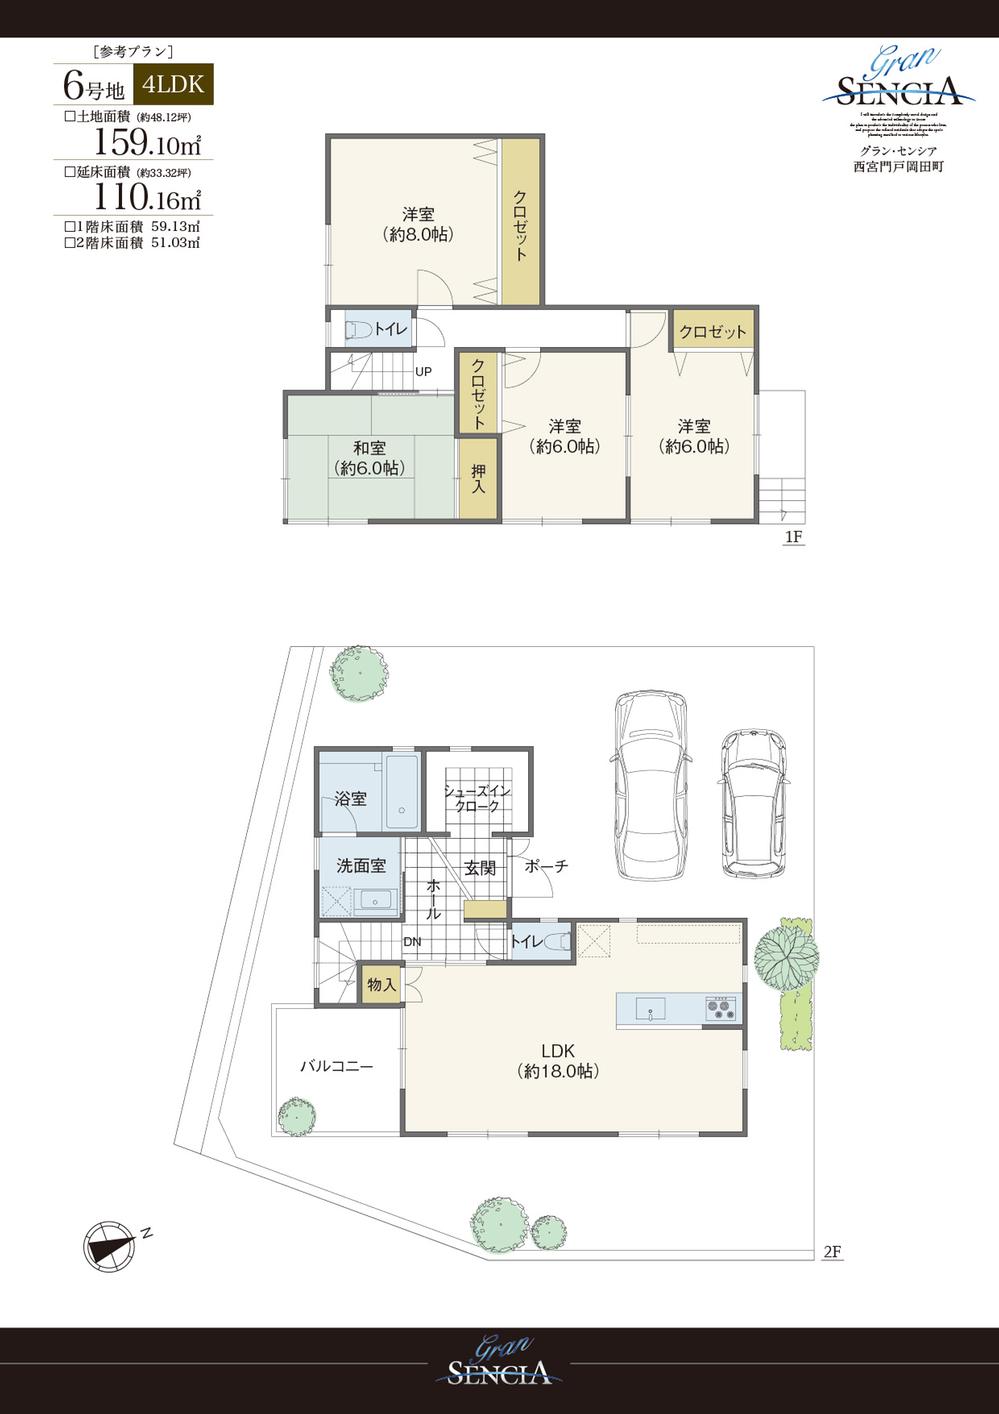 Compartment view + building plan example. Building plan example (No. 6 place reference plan) 4LDK, Land price 34,280,000 yen, Land area 159.1 sq m , Building price 20,520,000 yen, Building area 110.16 sq m